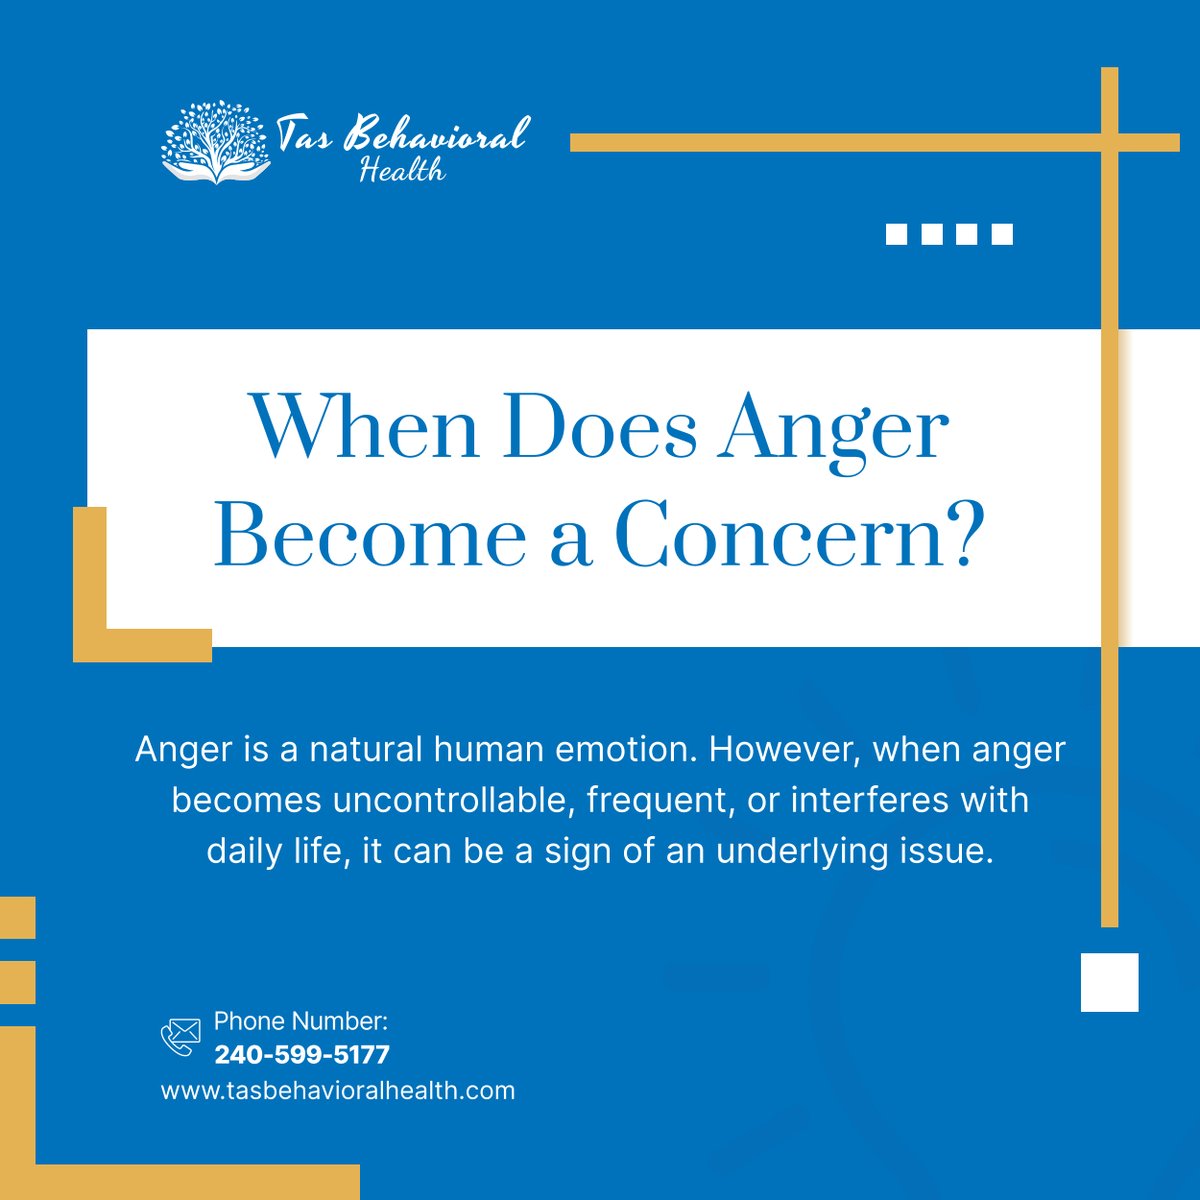 It's okay to feel angry! But if anger is causing problems, seeking professional help can equip you with healthy coping mechanisms. #CumberlandMD #MentalHealthClinic #AngerManagement